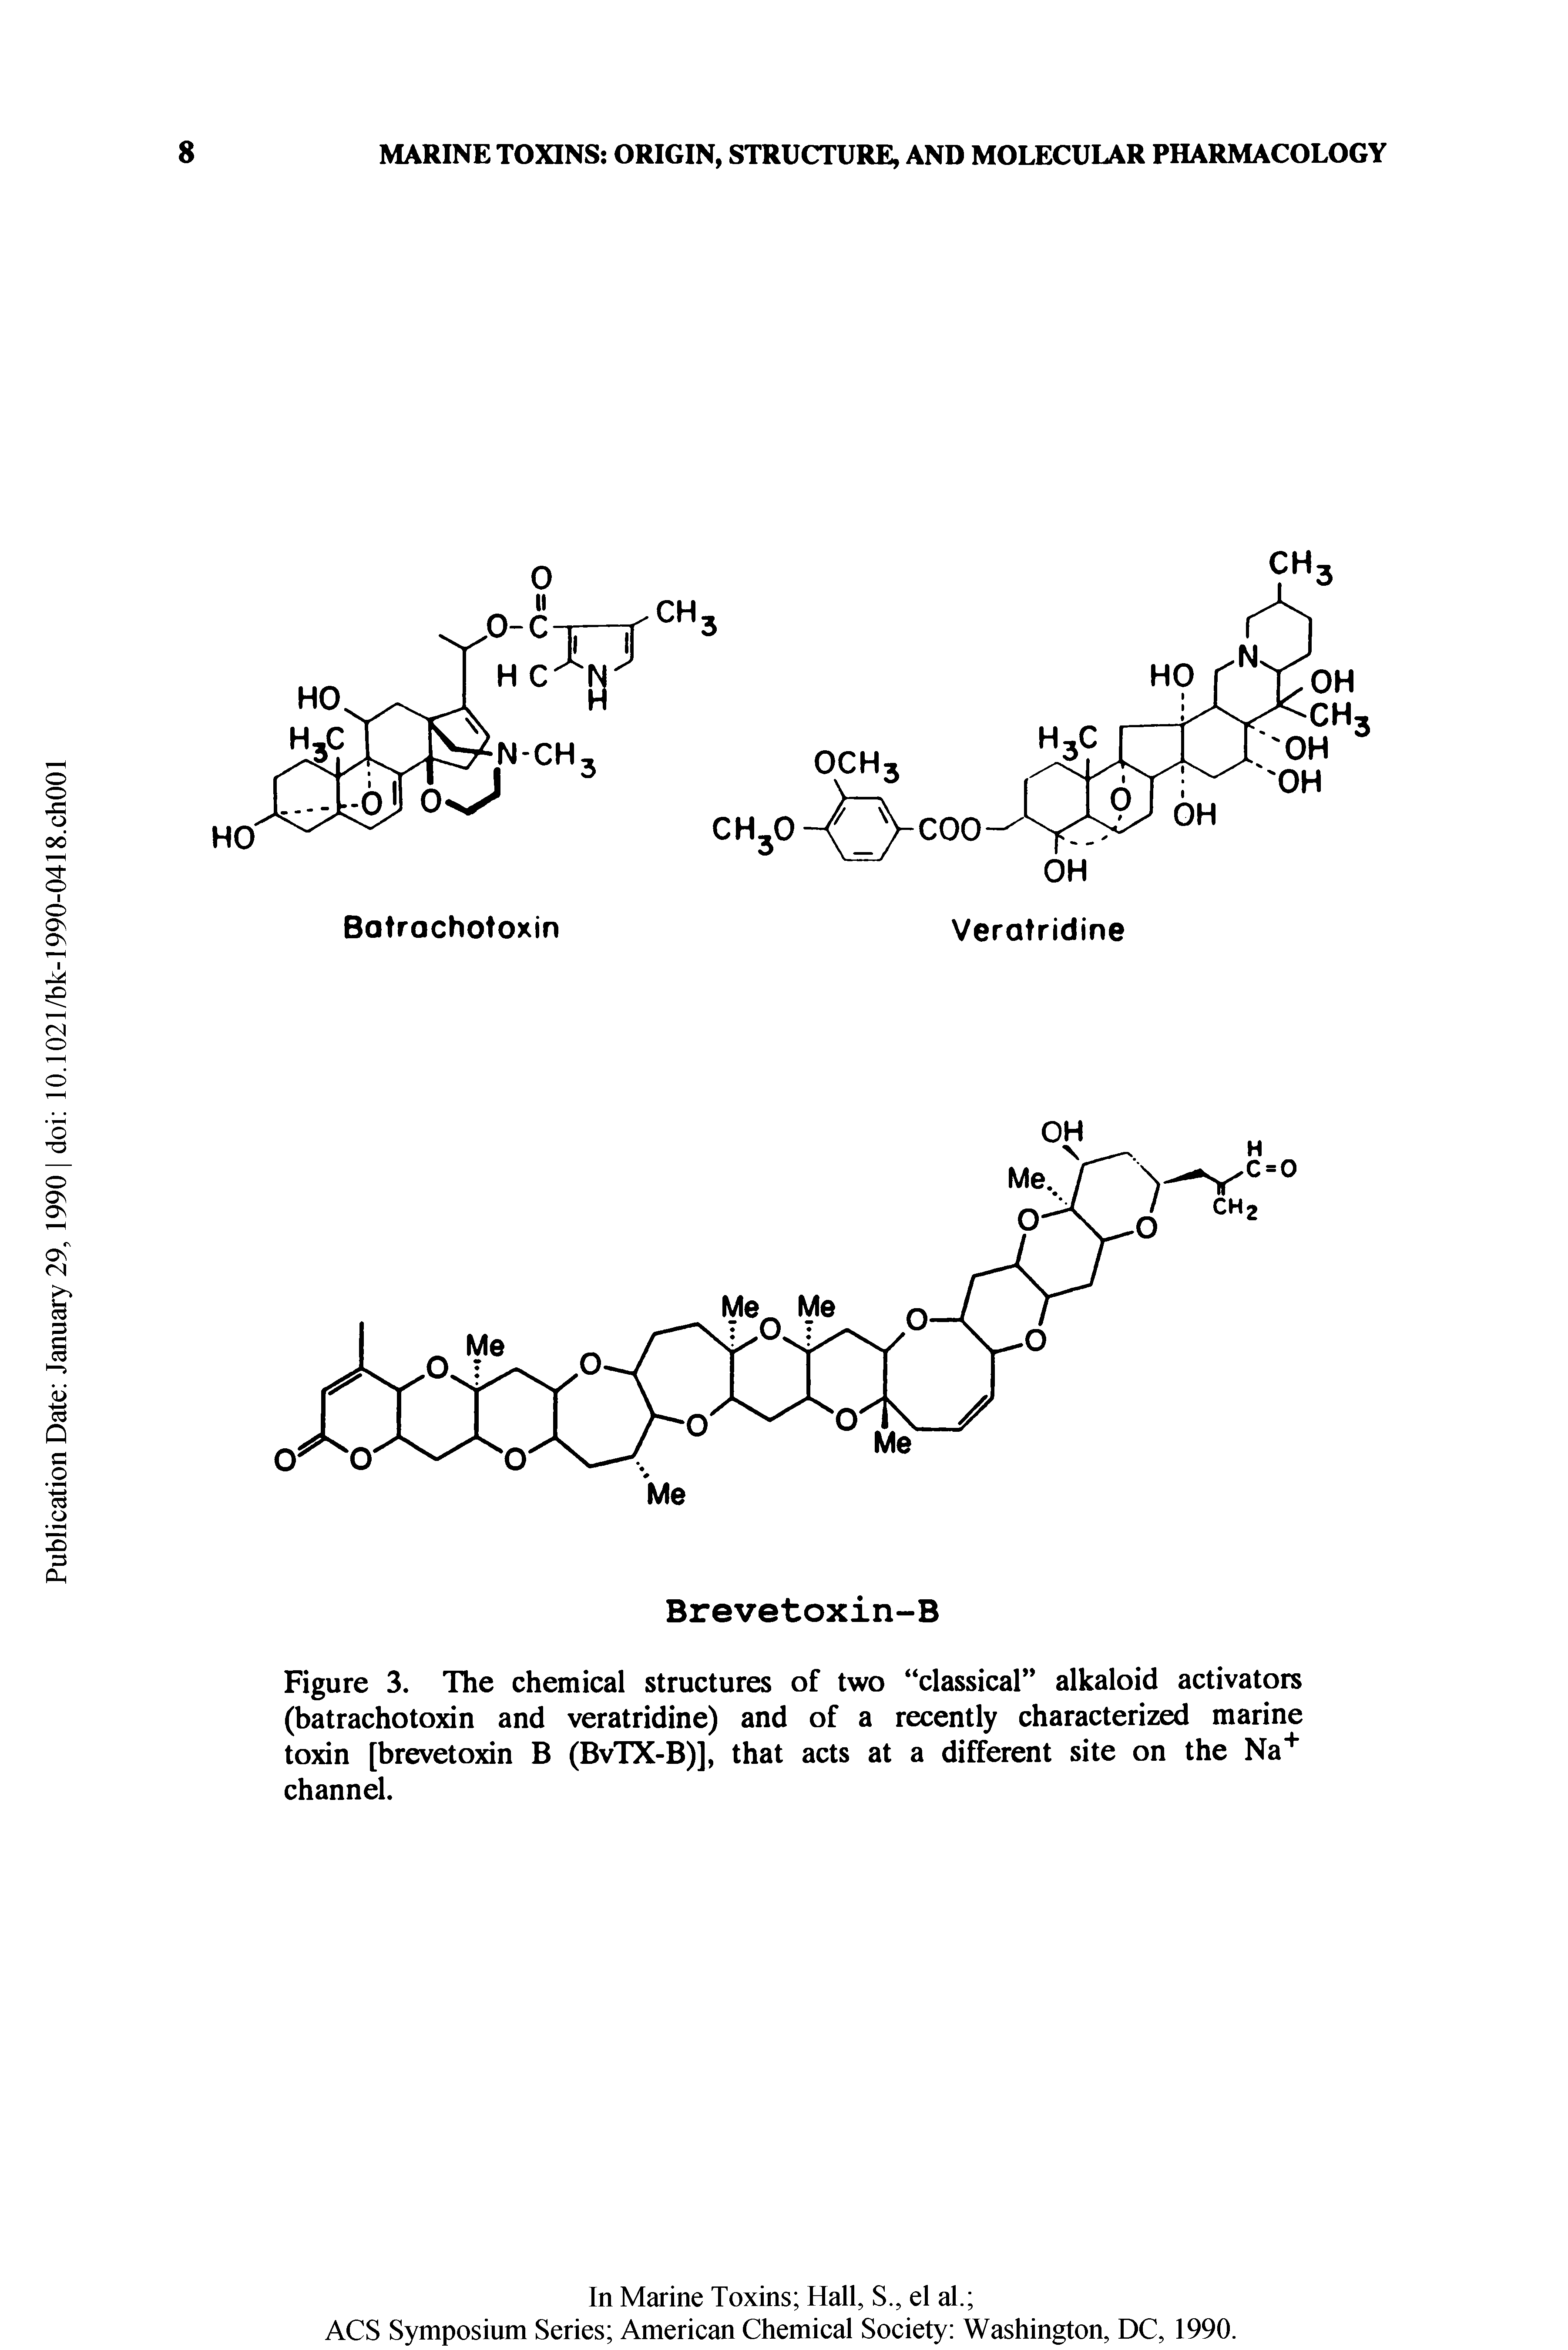 Figure 3. The chemical structures of two classical alkaloid activators (batrachotoxin and veratridine) and of a recently characterized marine toxin [brevetoxin B (BvTX-B)], that acts at a different site on the Na channel.